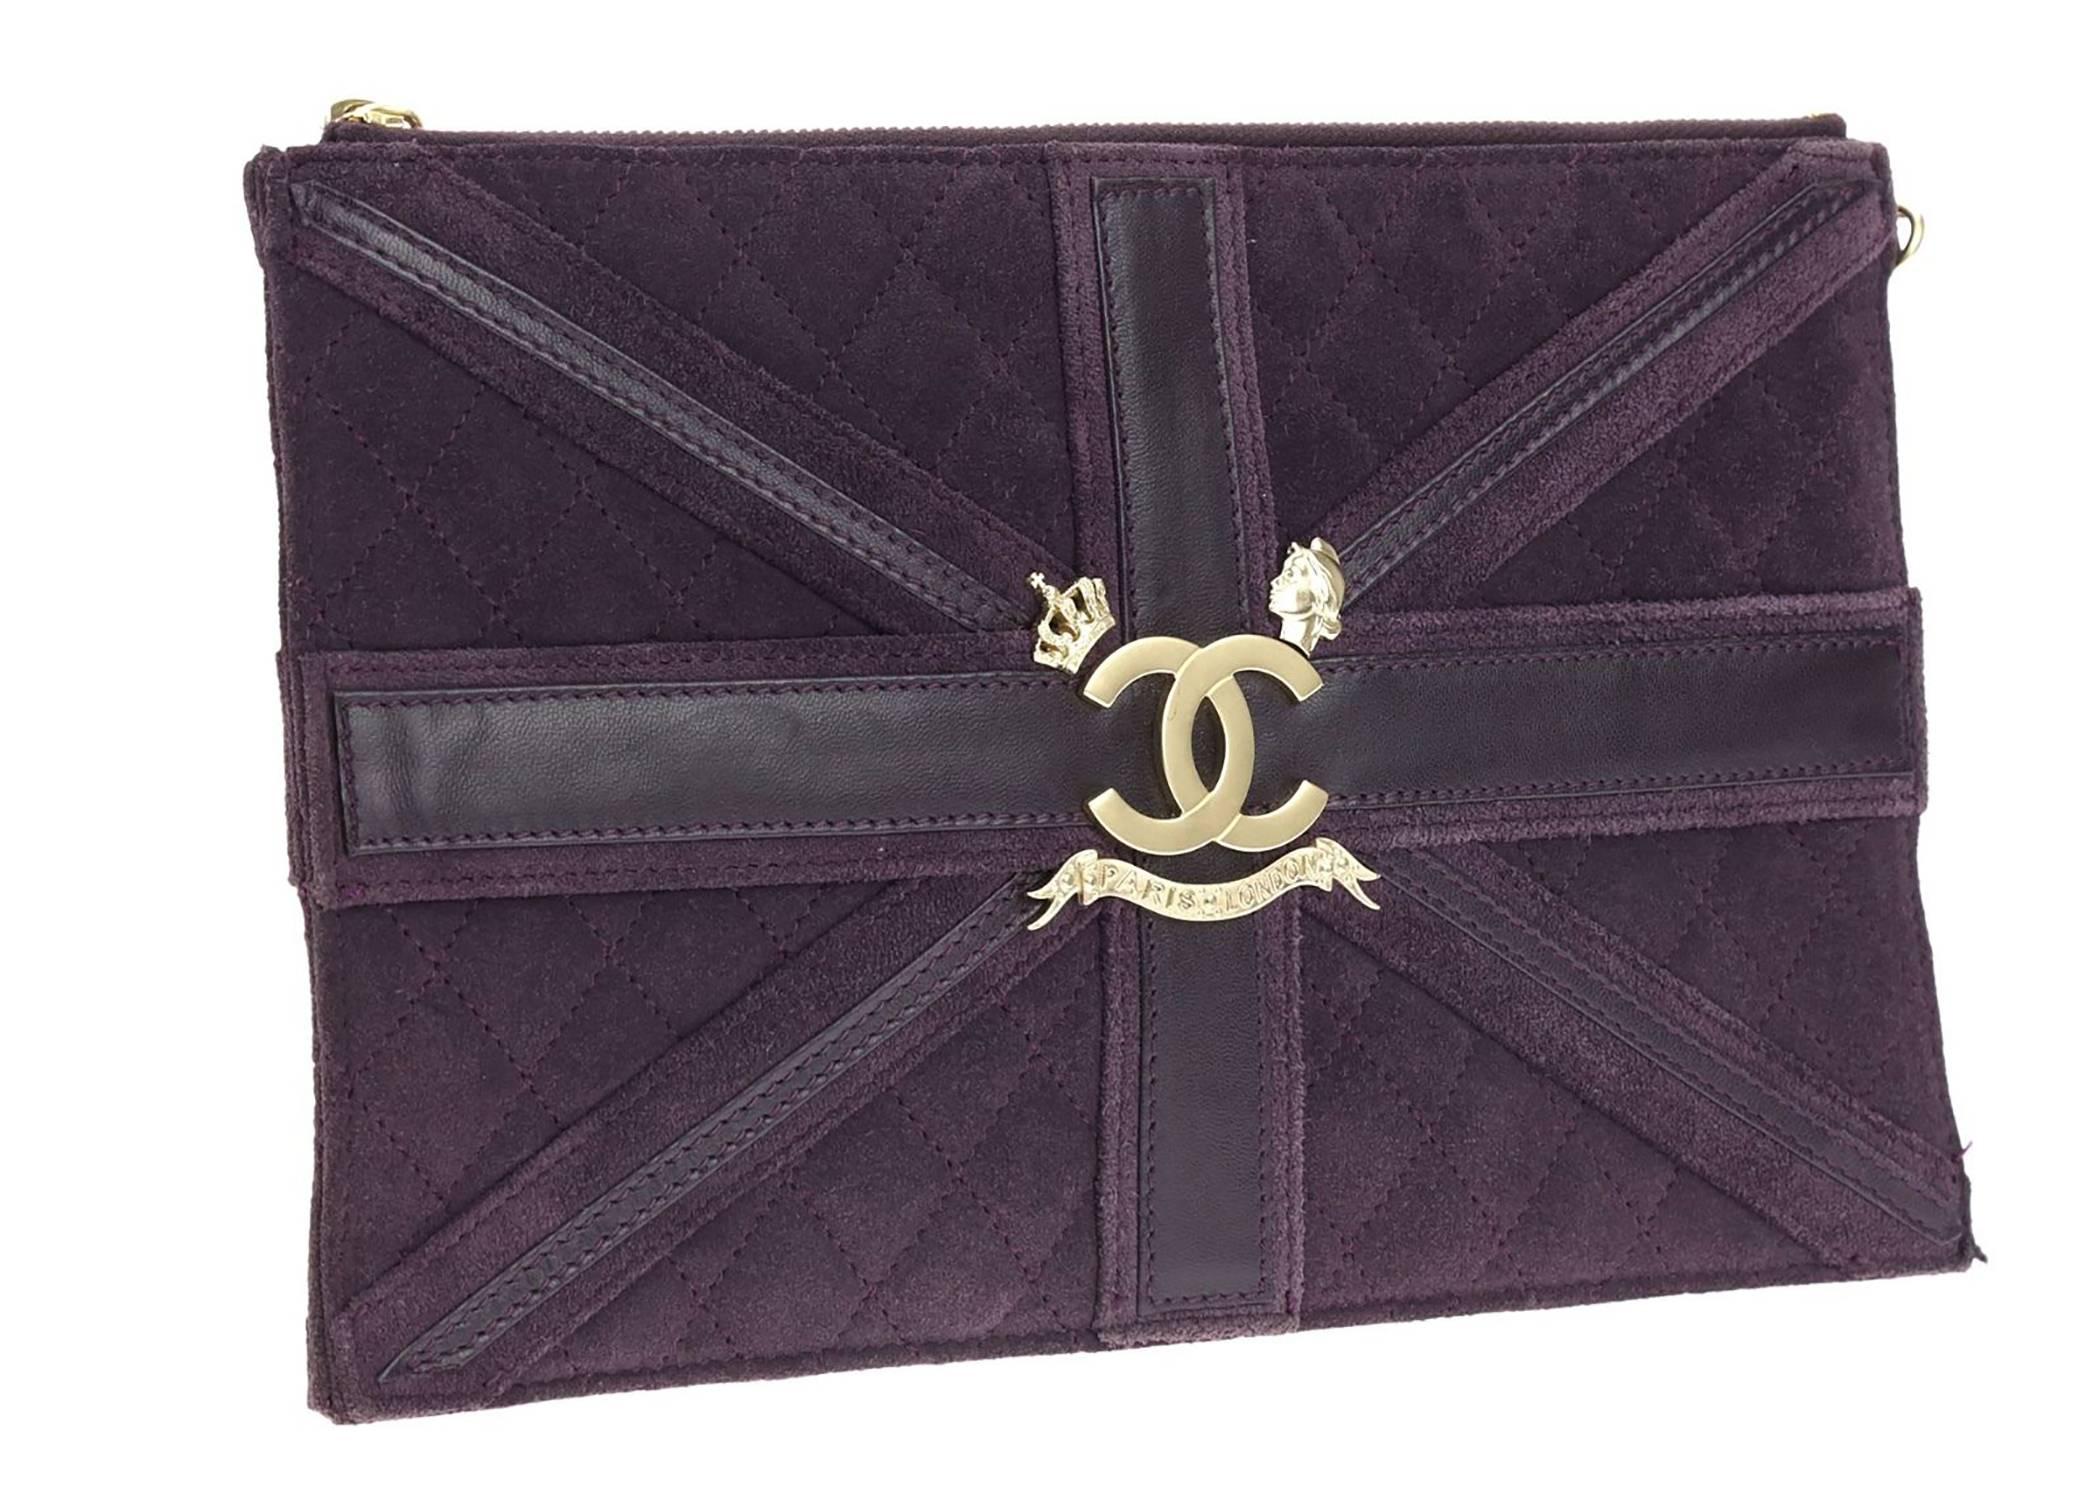 The Chanel Purple Suede Union Jack Zippered Wristlet is the perfect collectable bag to wear over your shoulder or as a wristlet to carry your daily essentials. This bag is featured in purple suede with purple leather piping details. The iconic CC